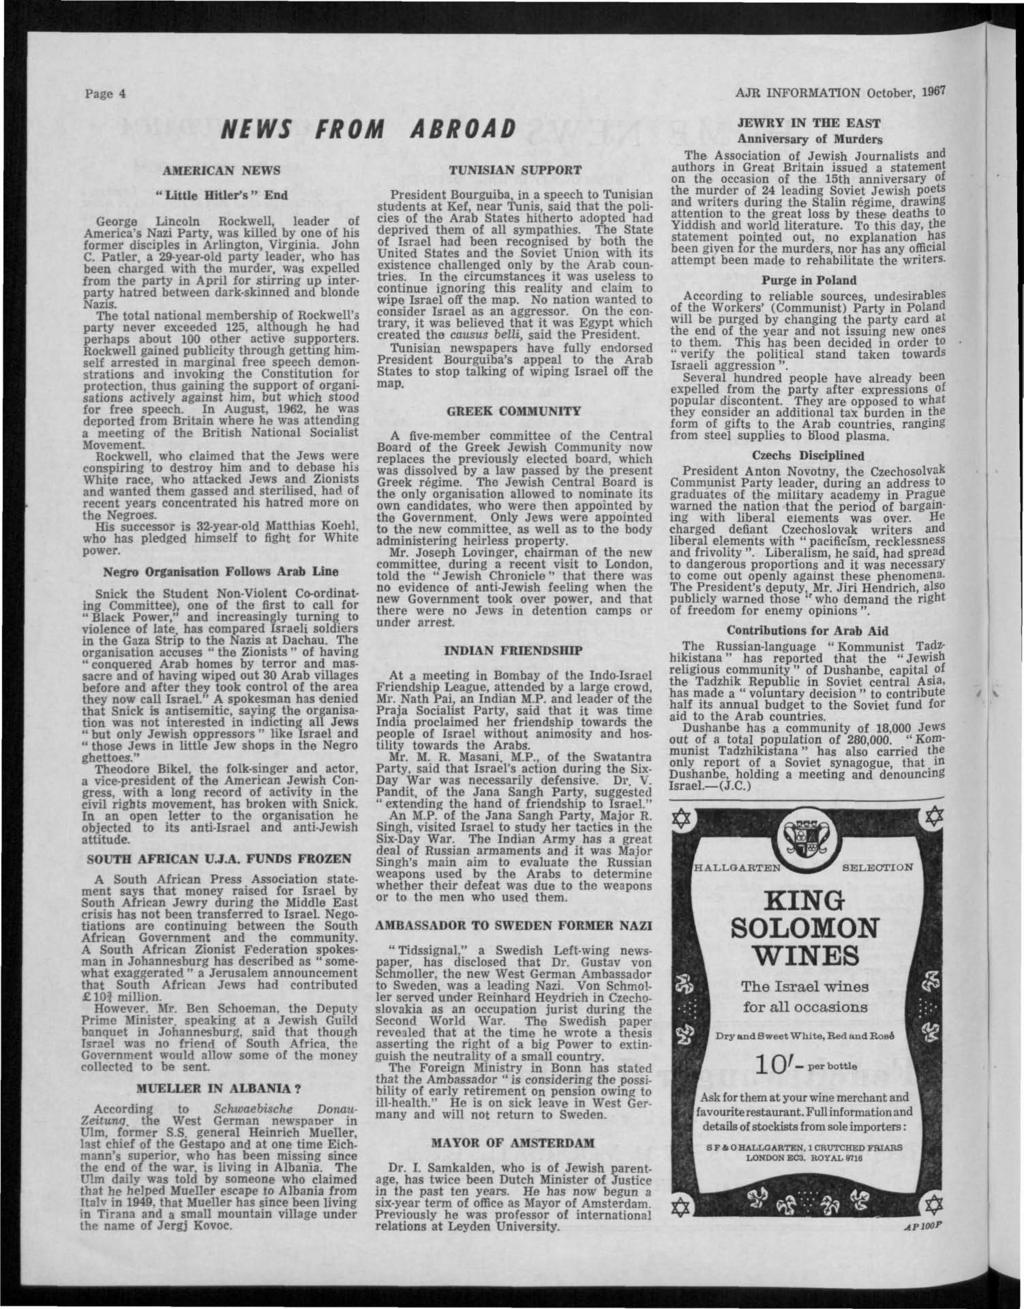 Page 4 AJR INFORMATION October, 1967 NEWS FROM ABROAD AMERICAN NEWS "Little Hitler's" End George Lincoln Rockwell, leader of America's Nazi Party, was killed by one of his former disciples in